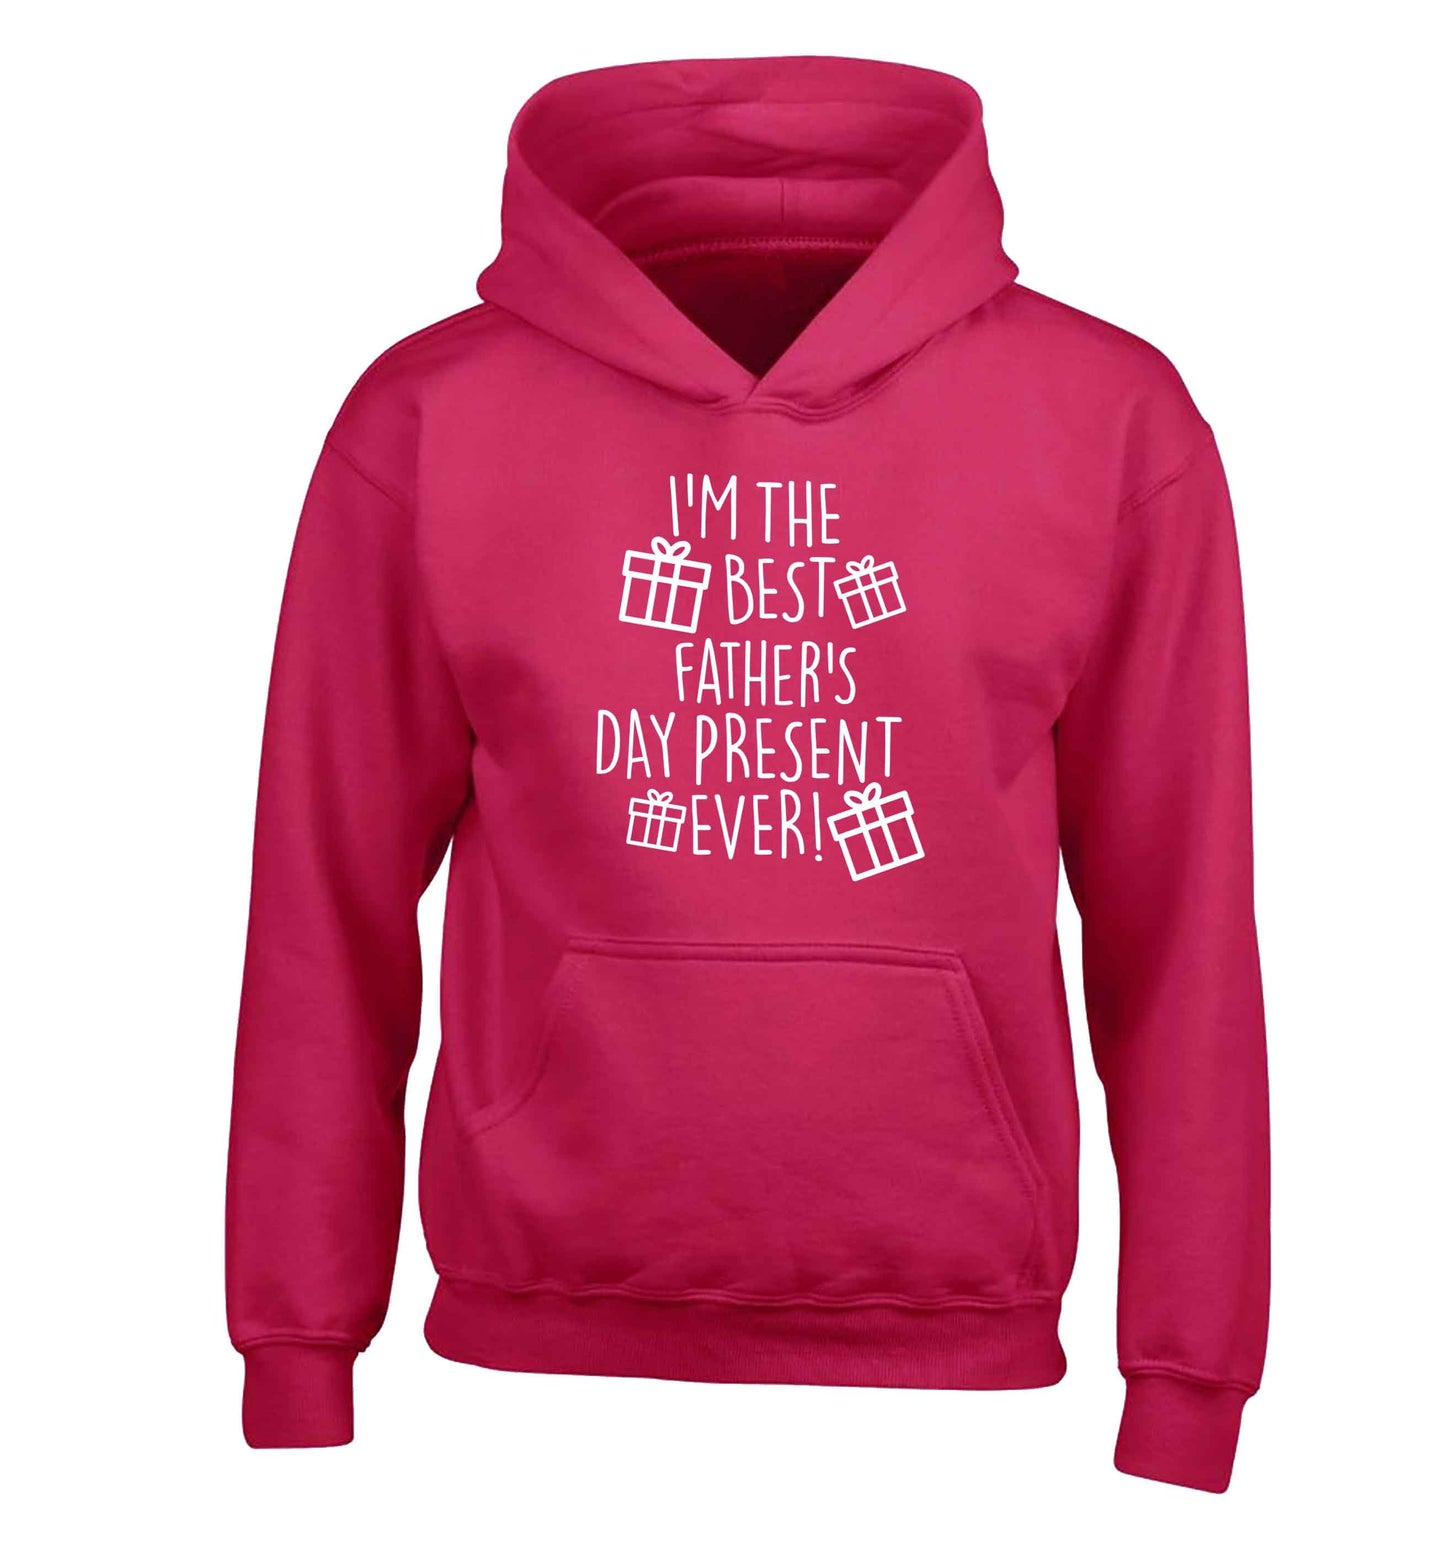 I'm the best father's day present ever!| Children's Hoodie